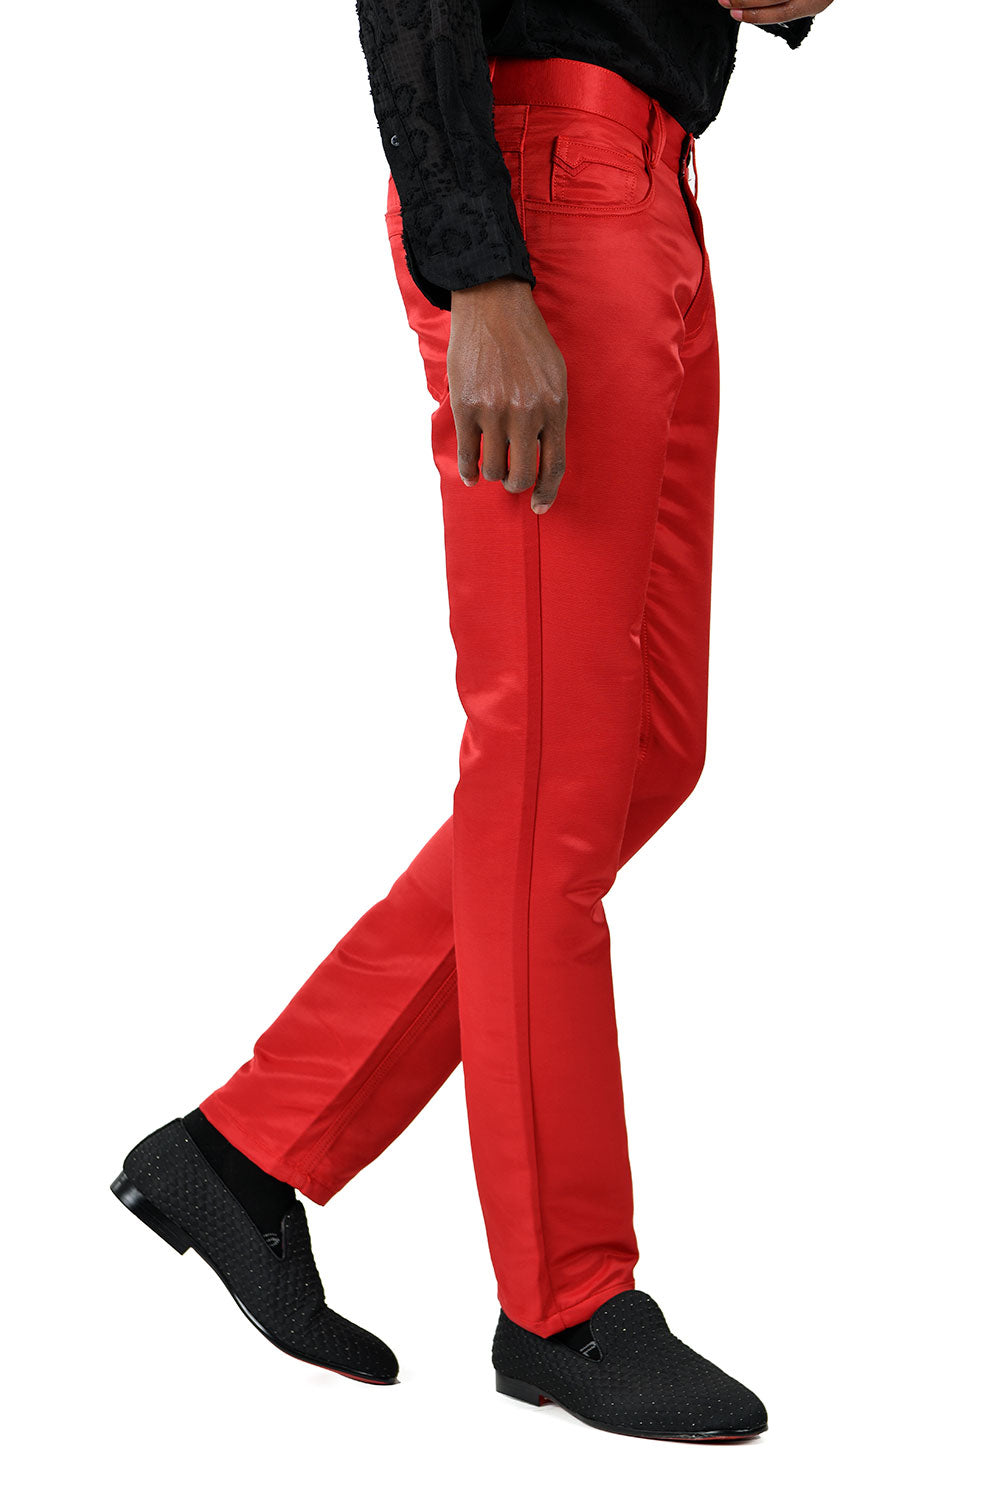 BARABAS Men's Shiny Solid Color Red Chino Pants 2605